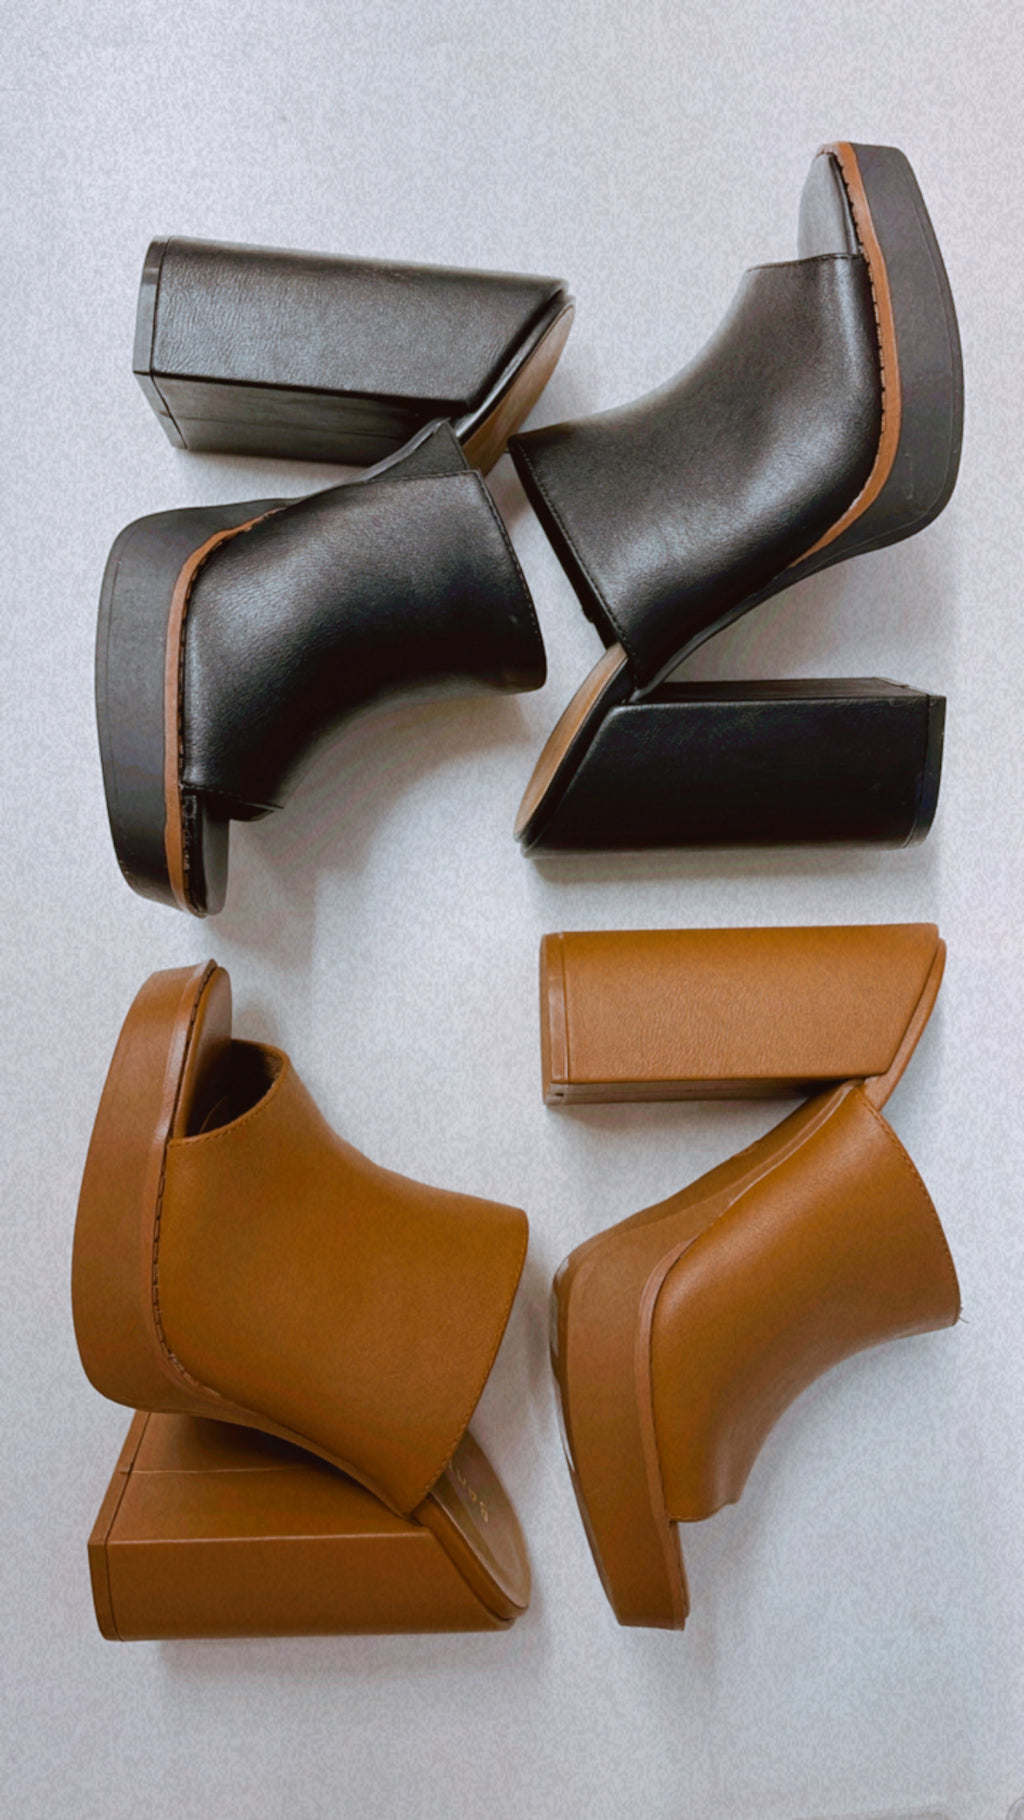 Heels feature a solid color, wide 5" block heel, wide toe strap detail and runs true to size!